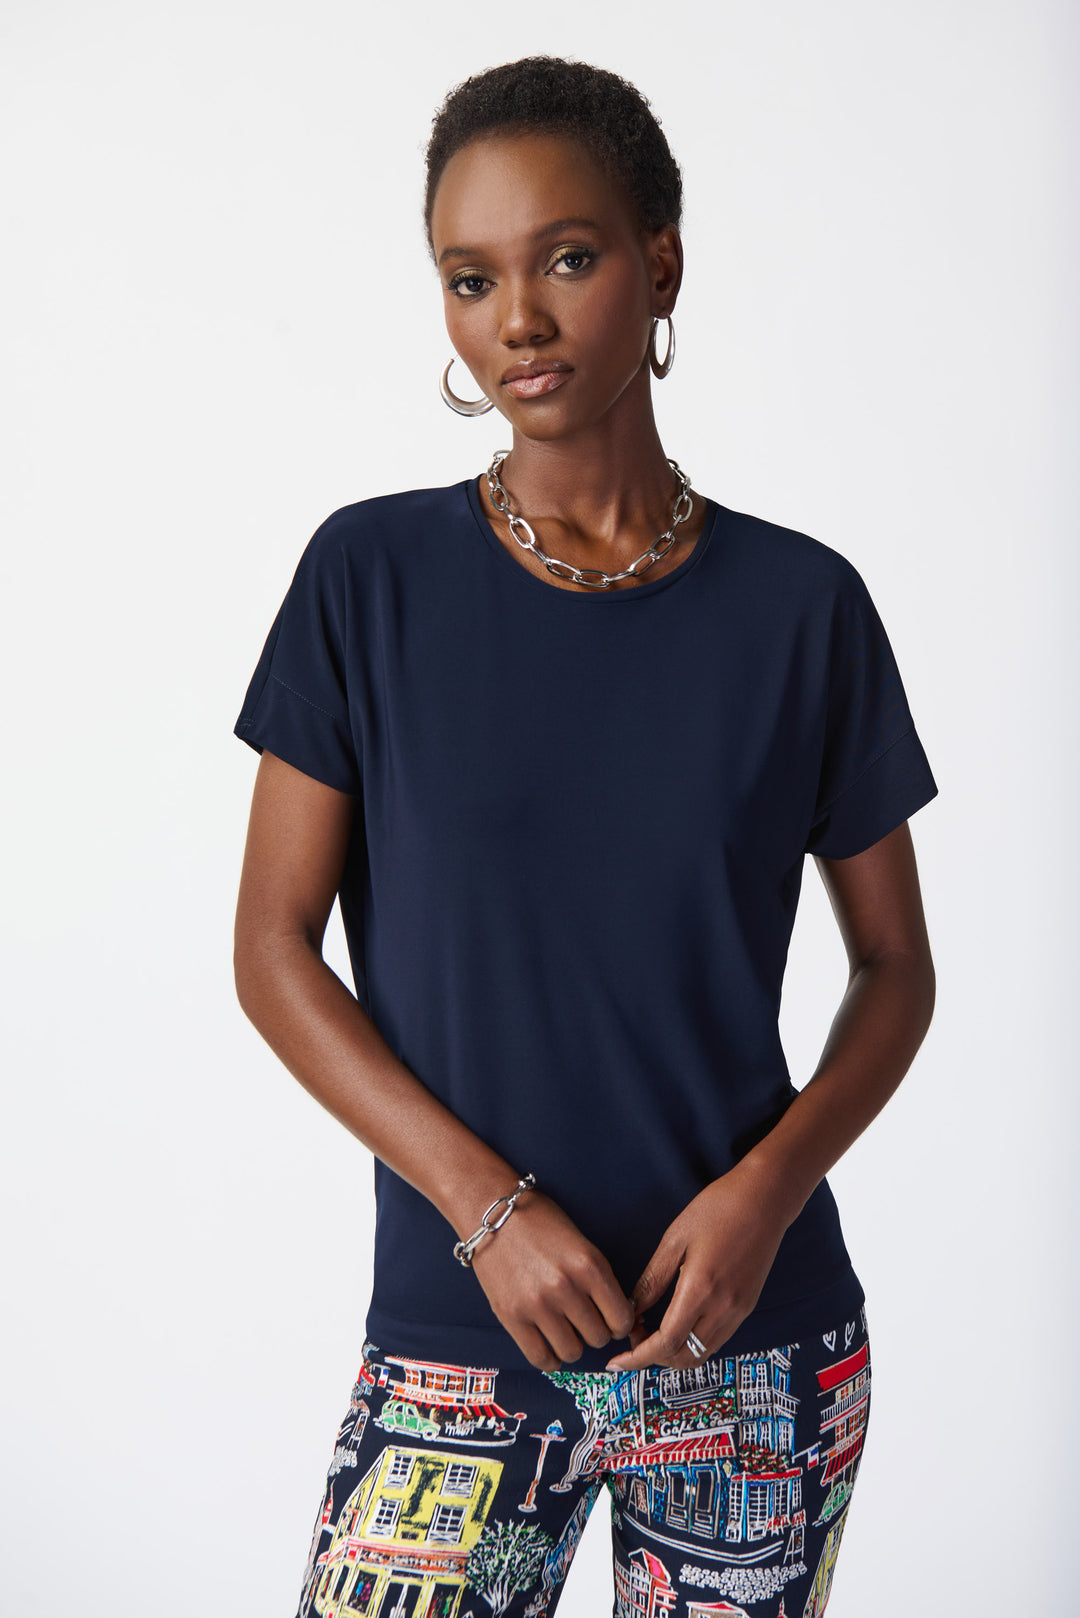 This classic t-neck design, featuring a roundneck and soft, smooth fabric, is perfect for any occasion.